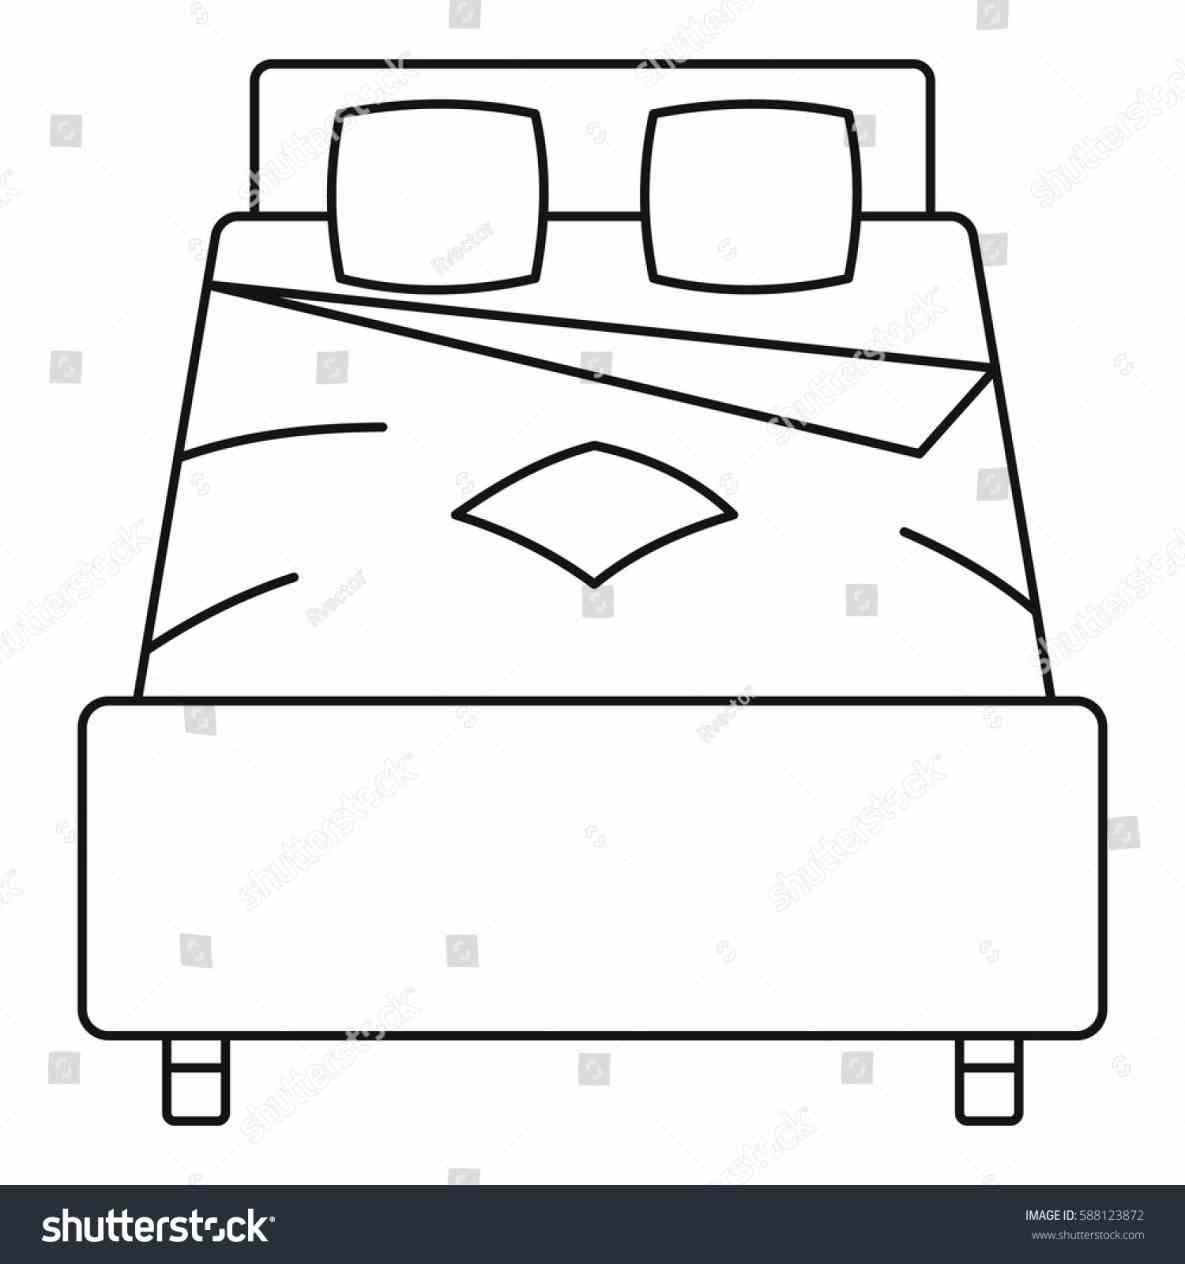 bed clipart double bed